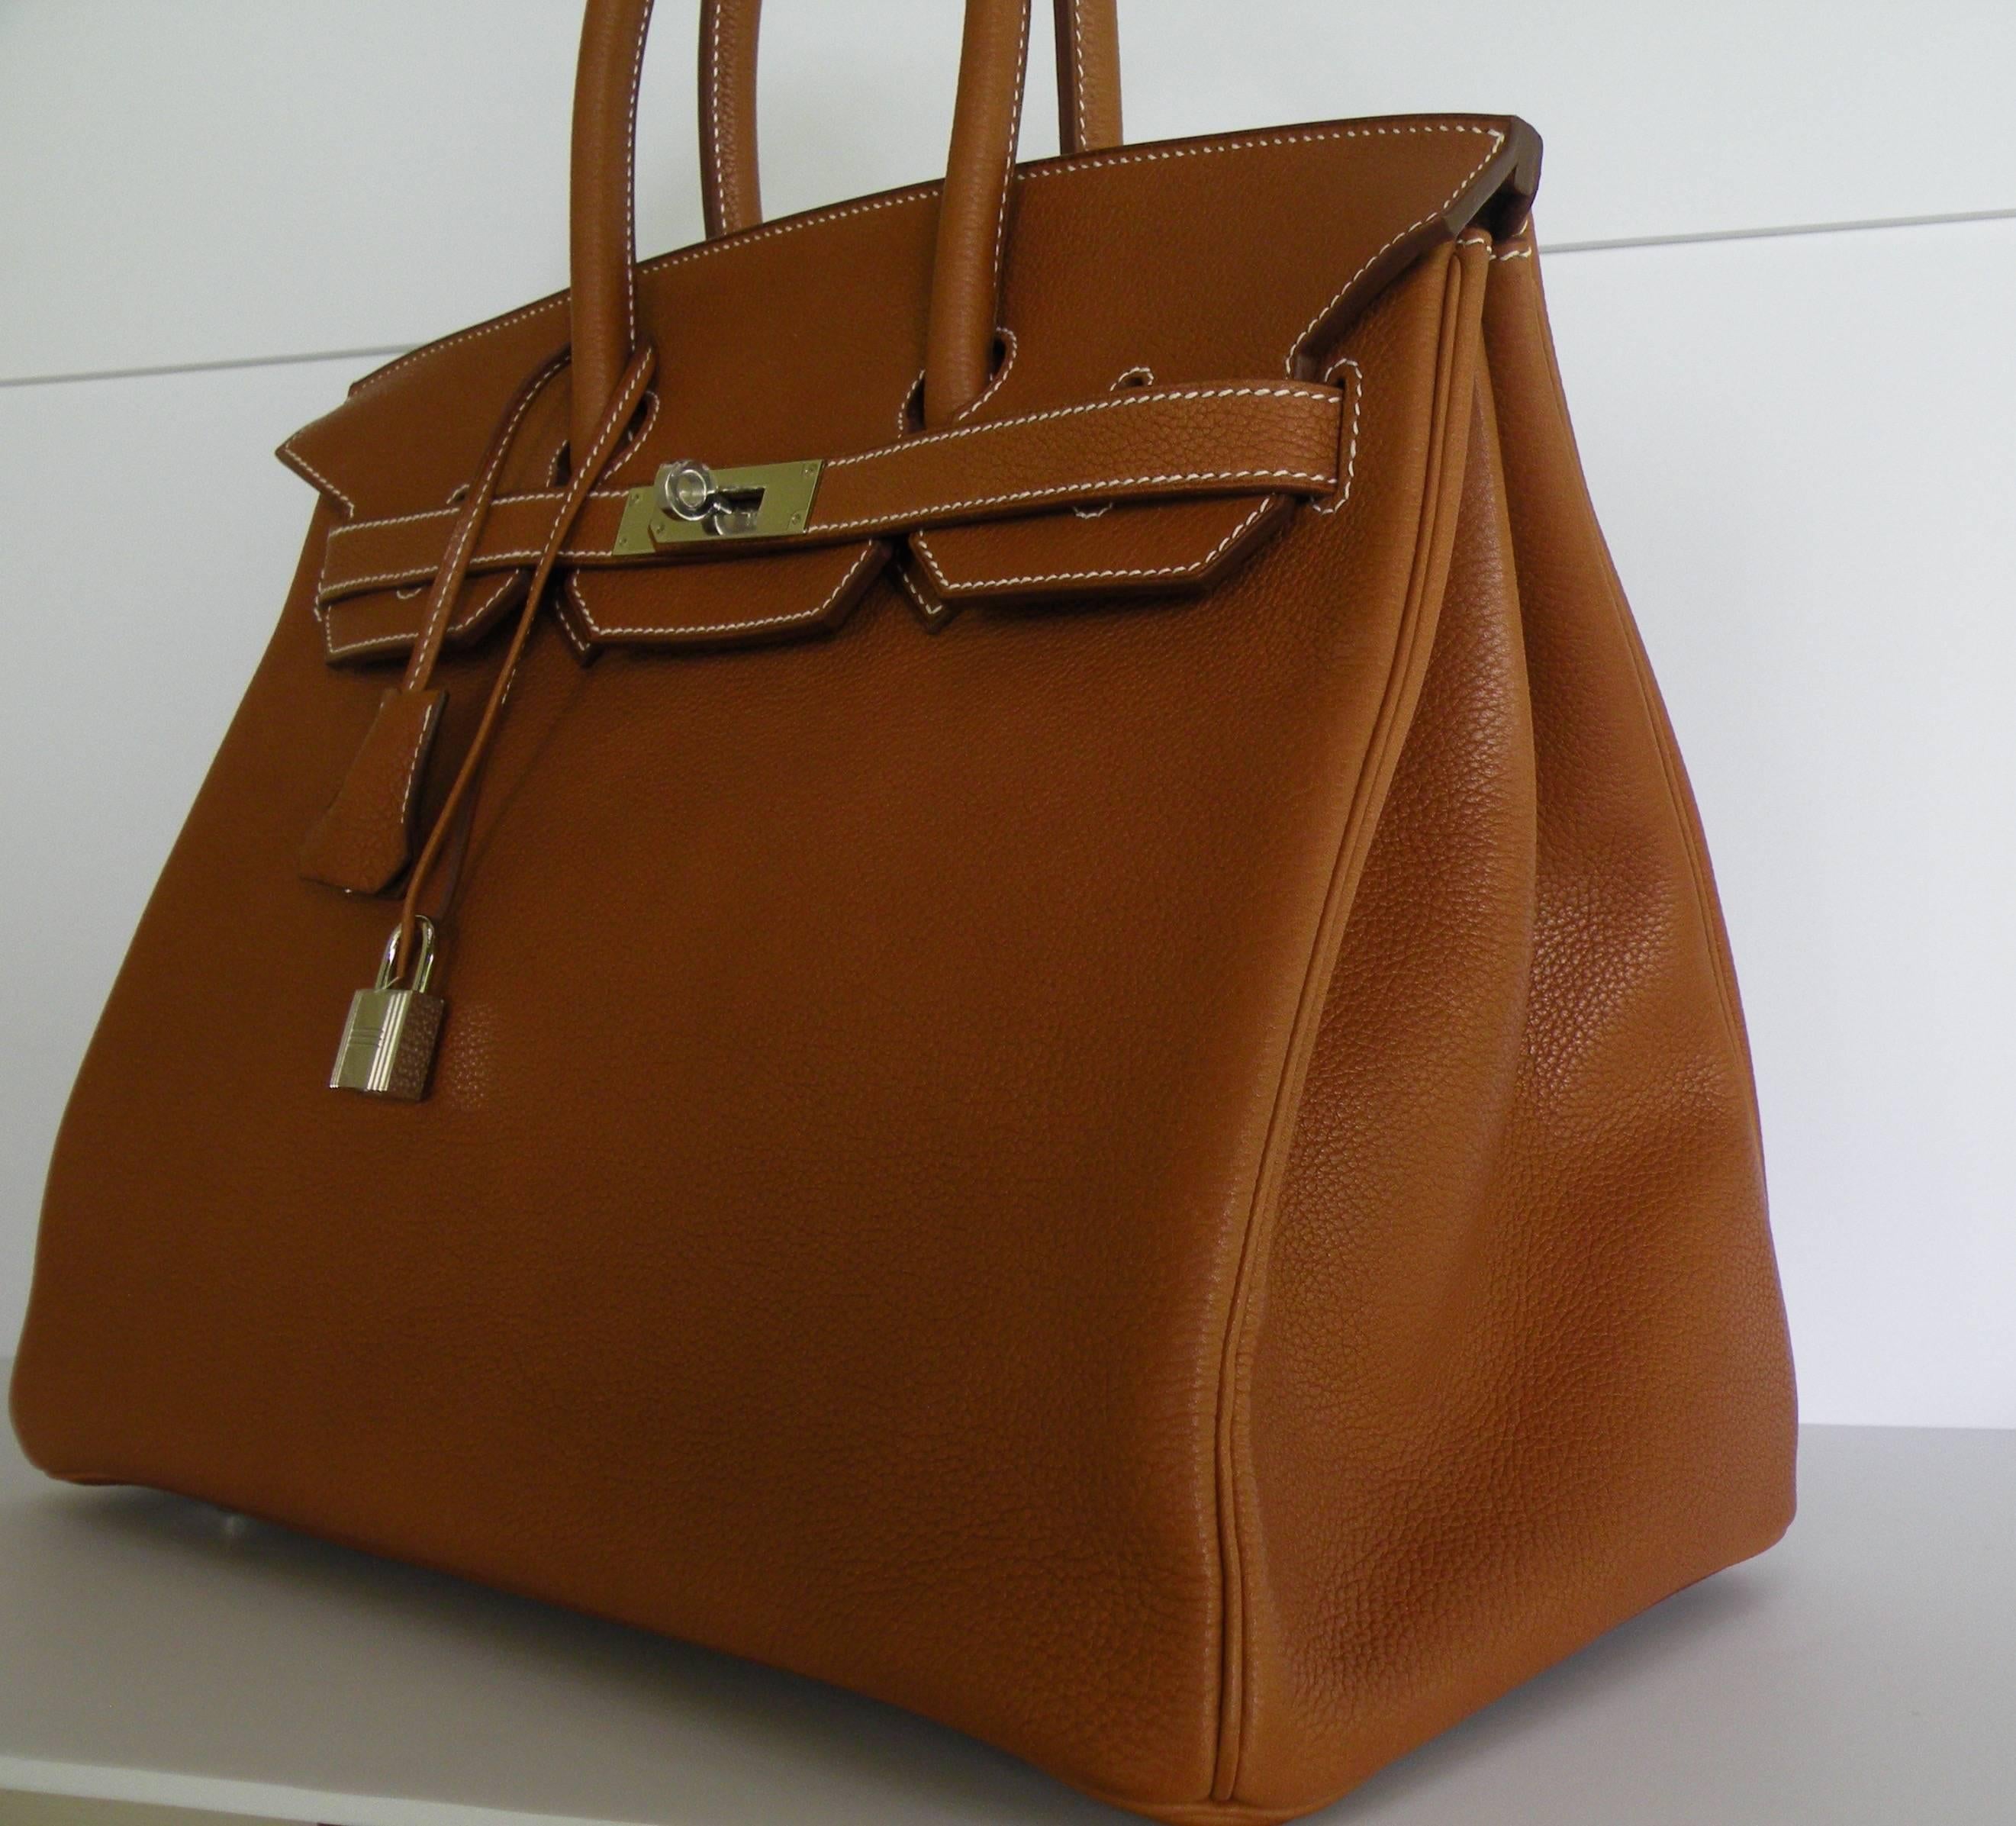 HERMES BIRKIN 35 Bag Barenia Faubourg Palladium Hardware RARE In New Condition For Sale In West Chester, PA